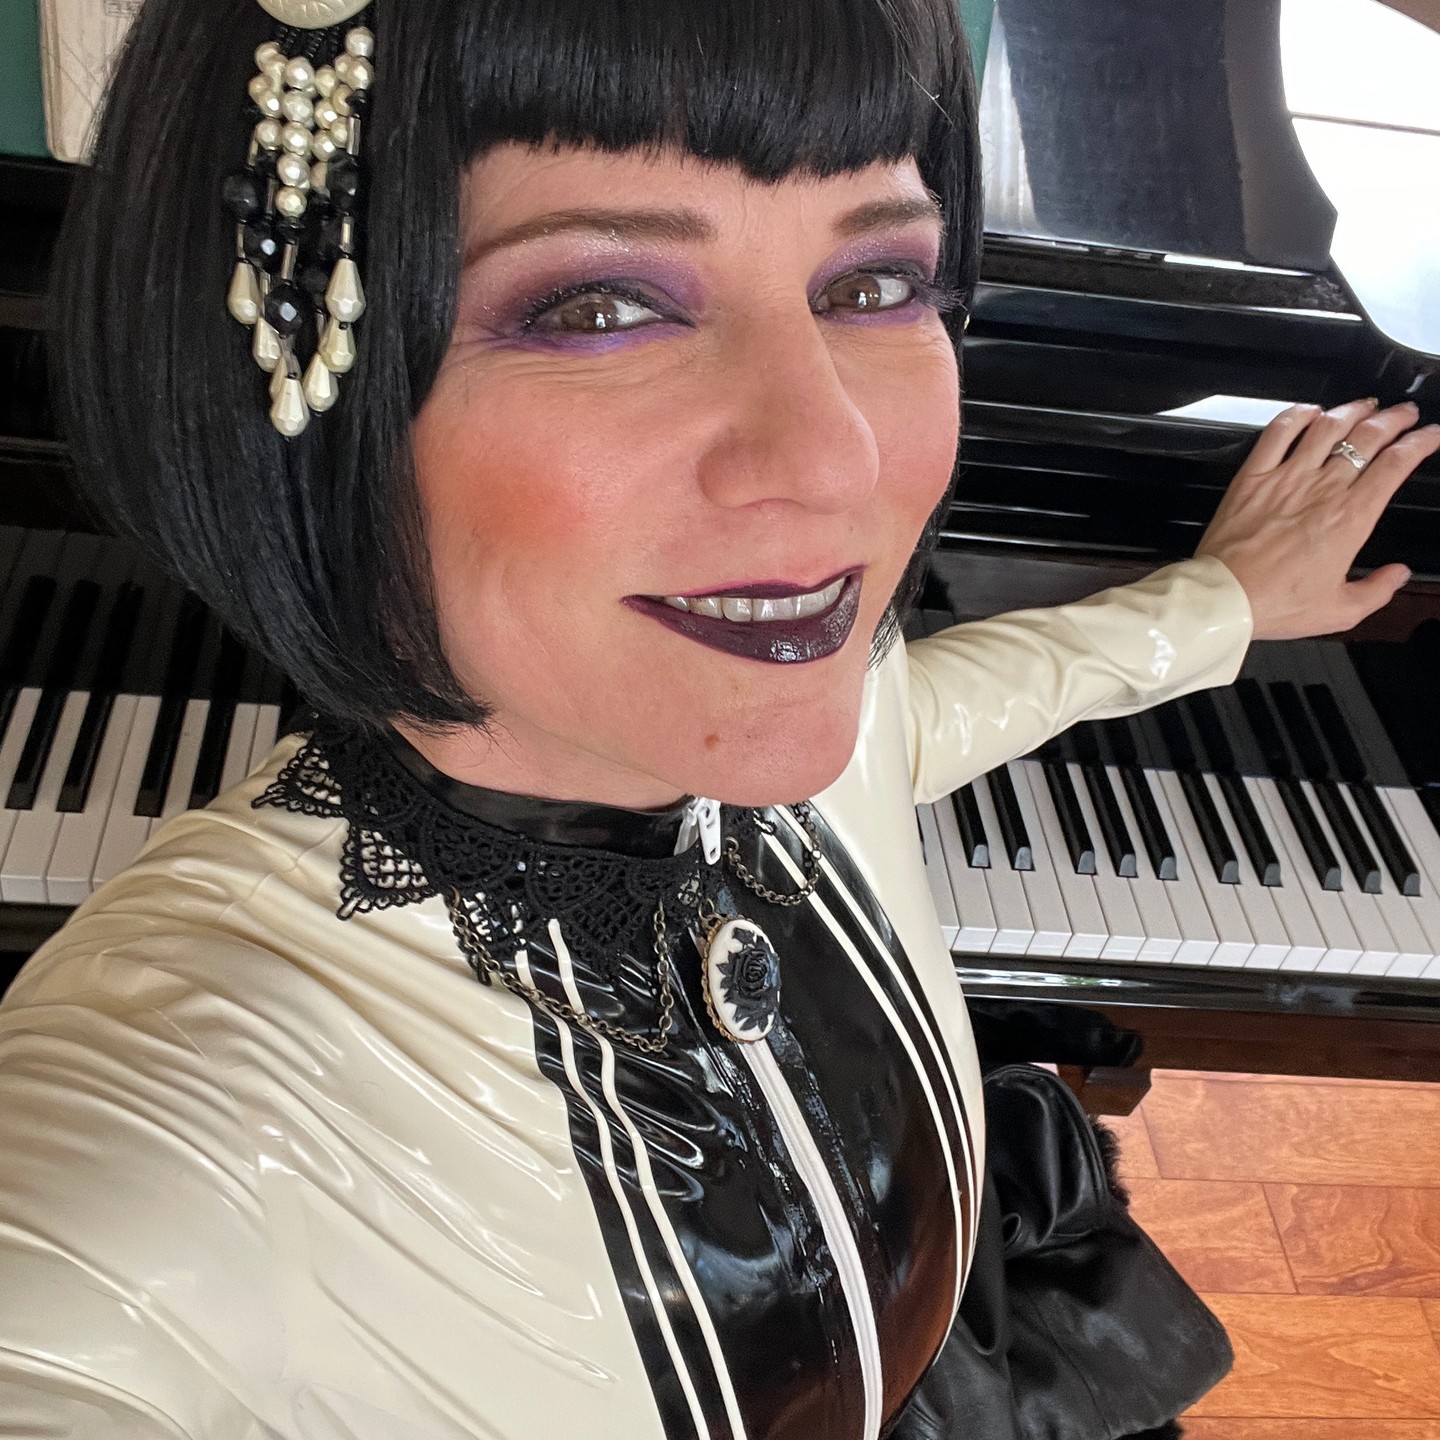 Had a very inspiring shoot this week, complete with fresh designer latex from @abigailgreydanus and a wonderful rendition of Chopin's Raindrop Prelude